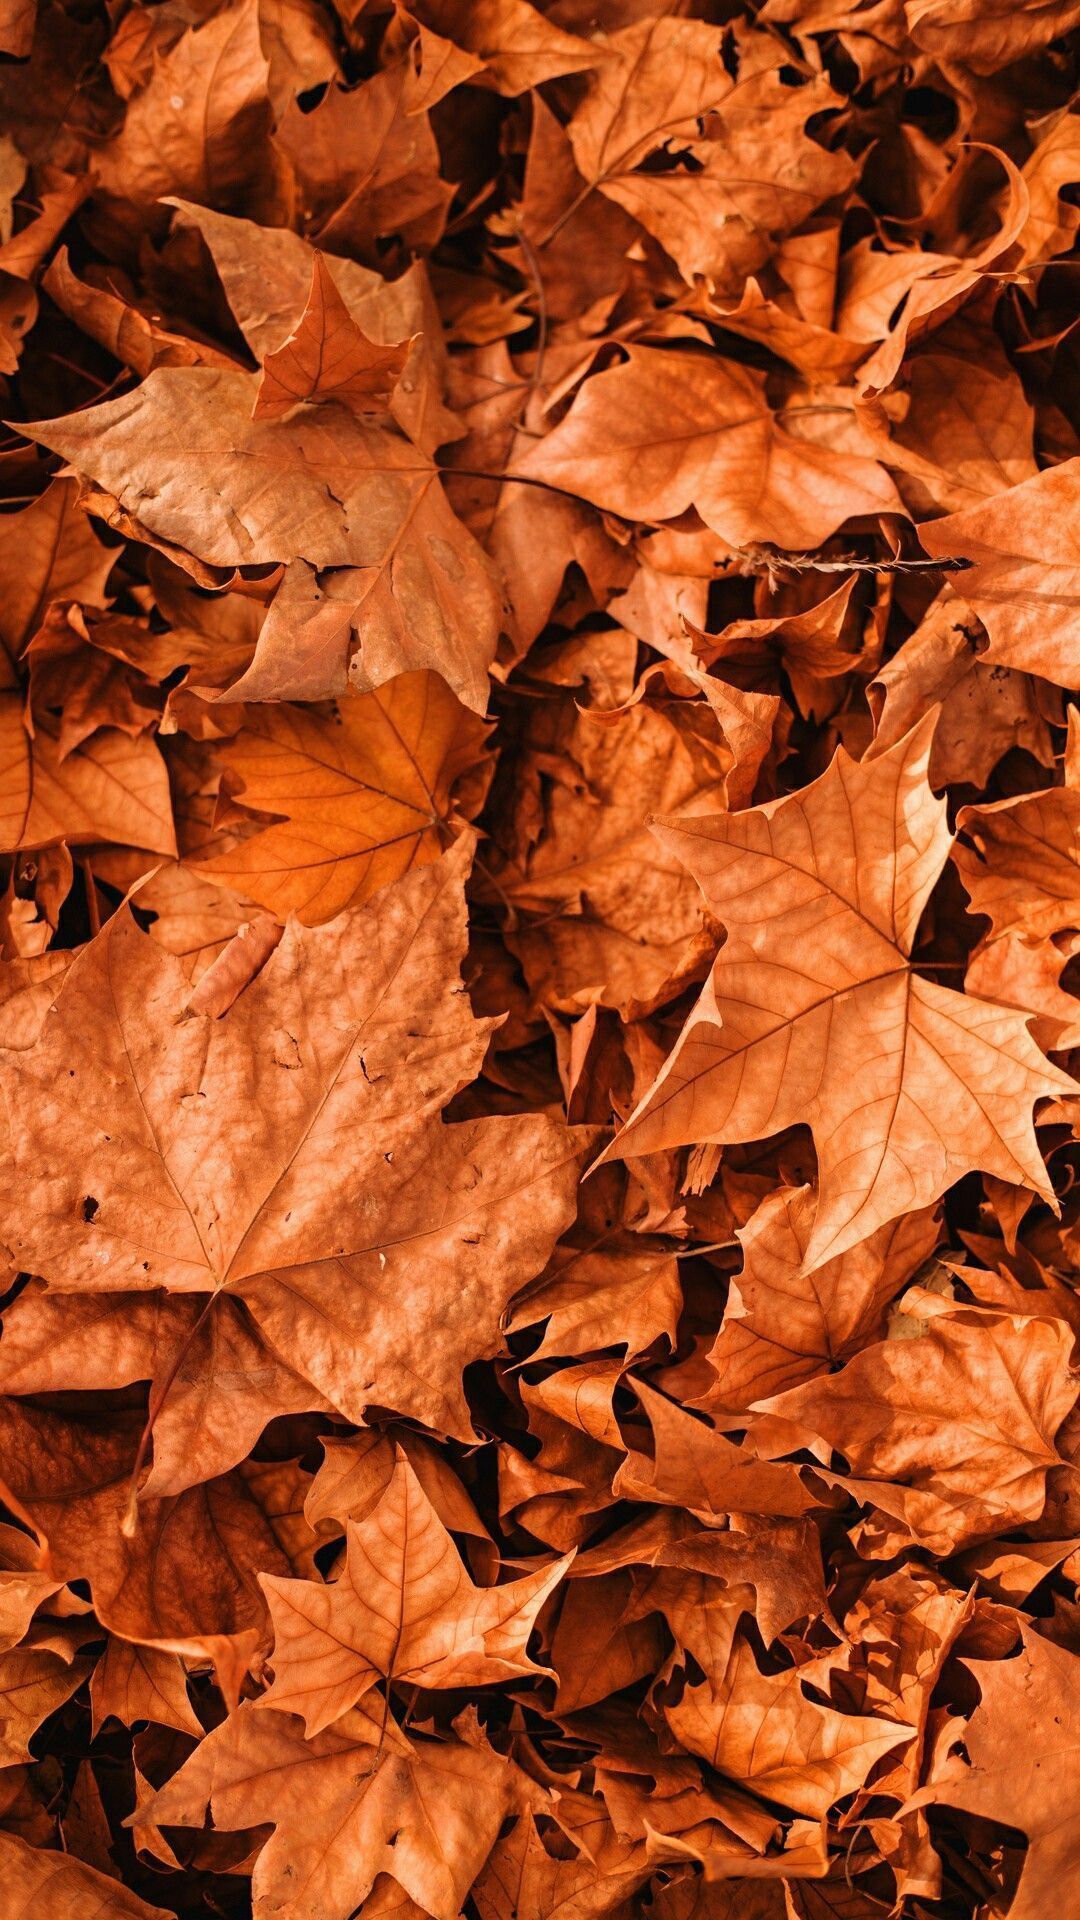 Aesthetic Fall Background Picture. iPhone wallpaper fall, Fall wallpaper, Cute fall wallpaper